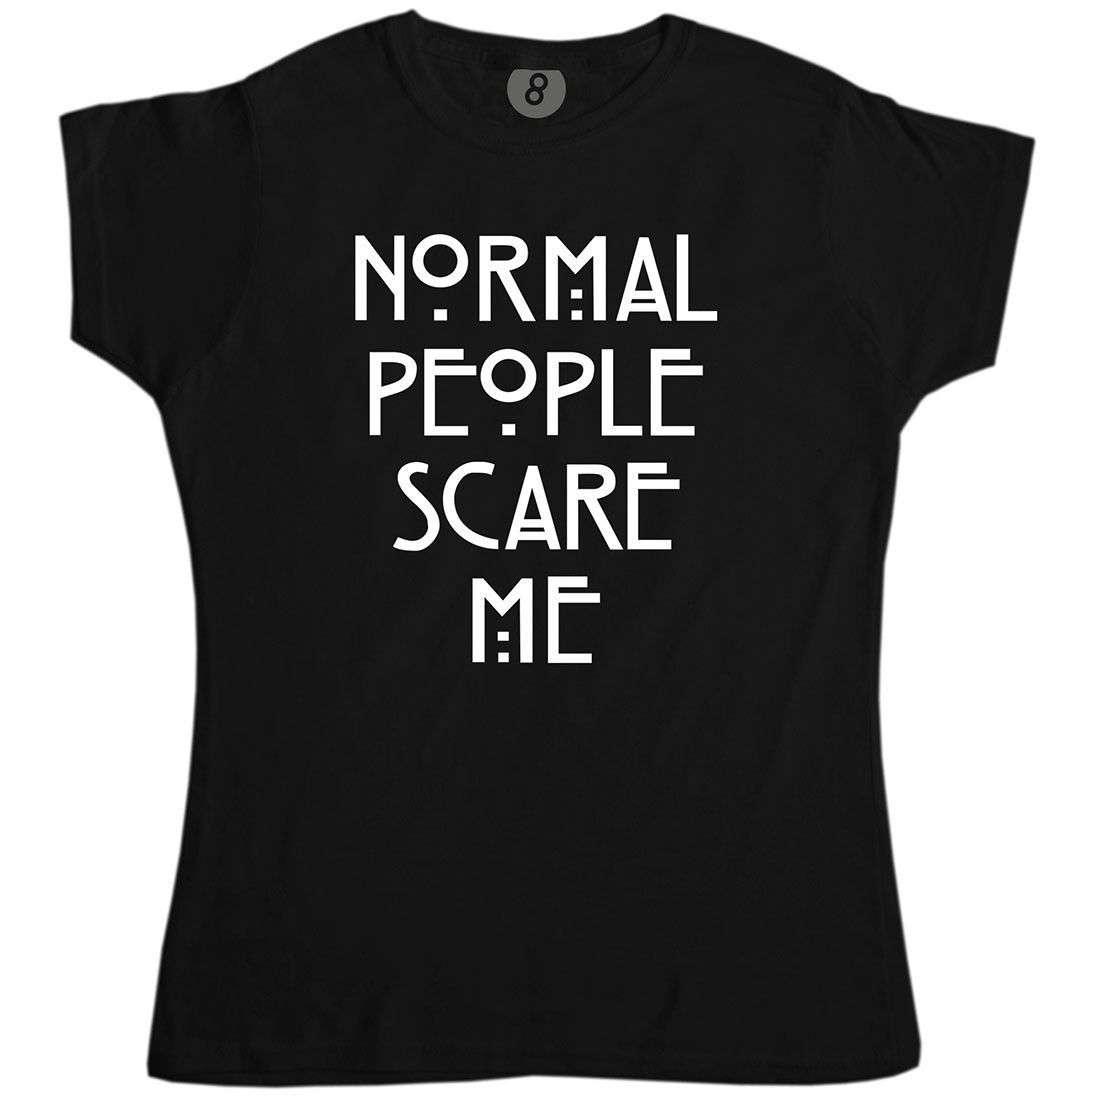 Normal People Scare Me Womens Fitted T-Shirt 8Ball